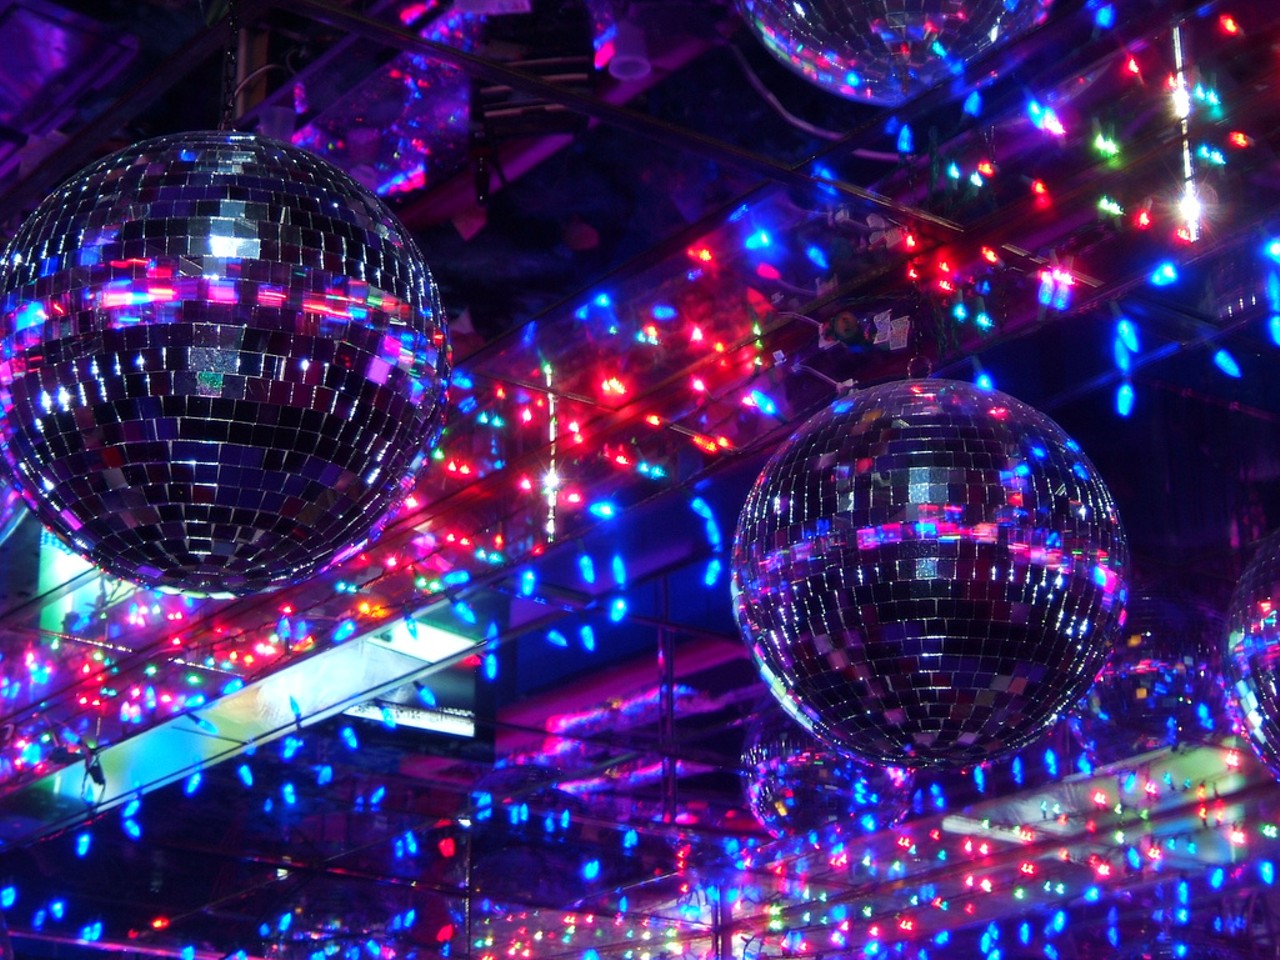 Dozens of disco balls spray pink-purple light across a dance floor worthy of its spectacle-loving, champion-jitterbug-dancing namesake, the late Mike &#147;Talayna&#148; Faille. Sing karaoke, dance and eat pizza until you stagger back into the outside world wondering what the hell happened. Photo courtesy of Flickr / J.G. Park.